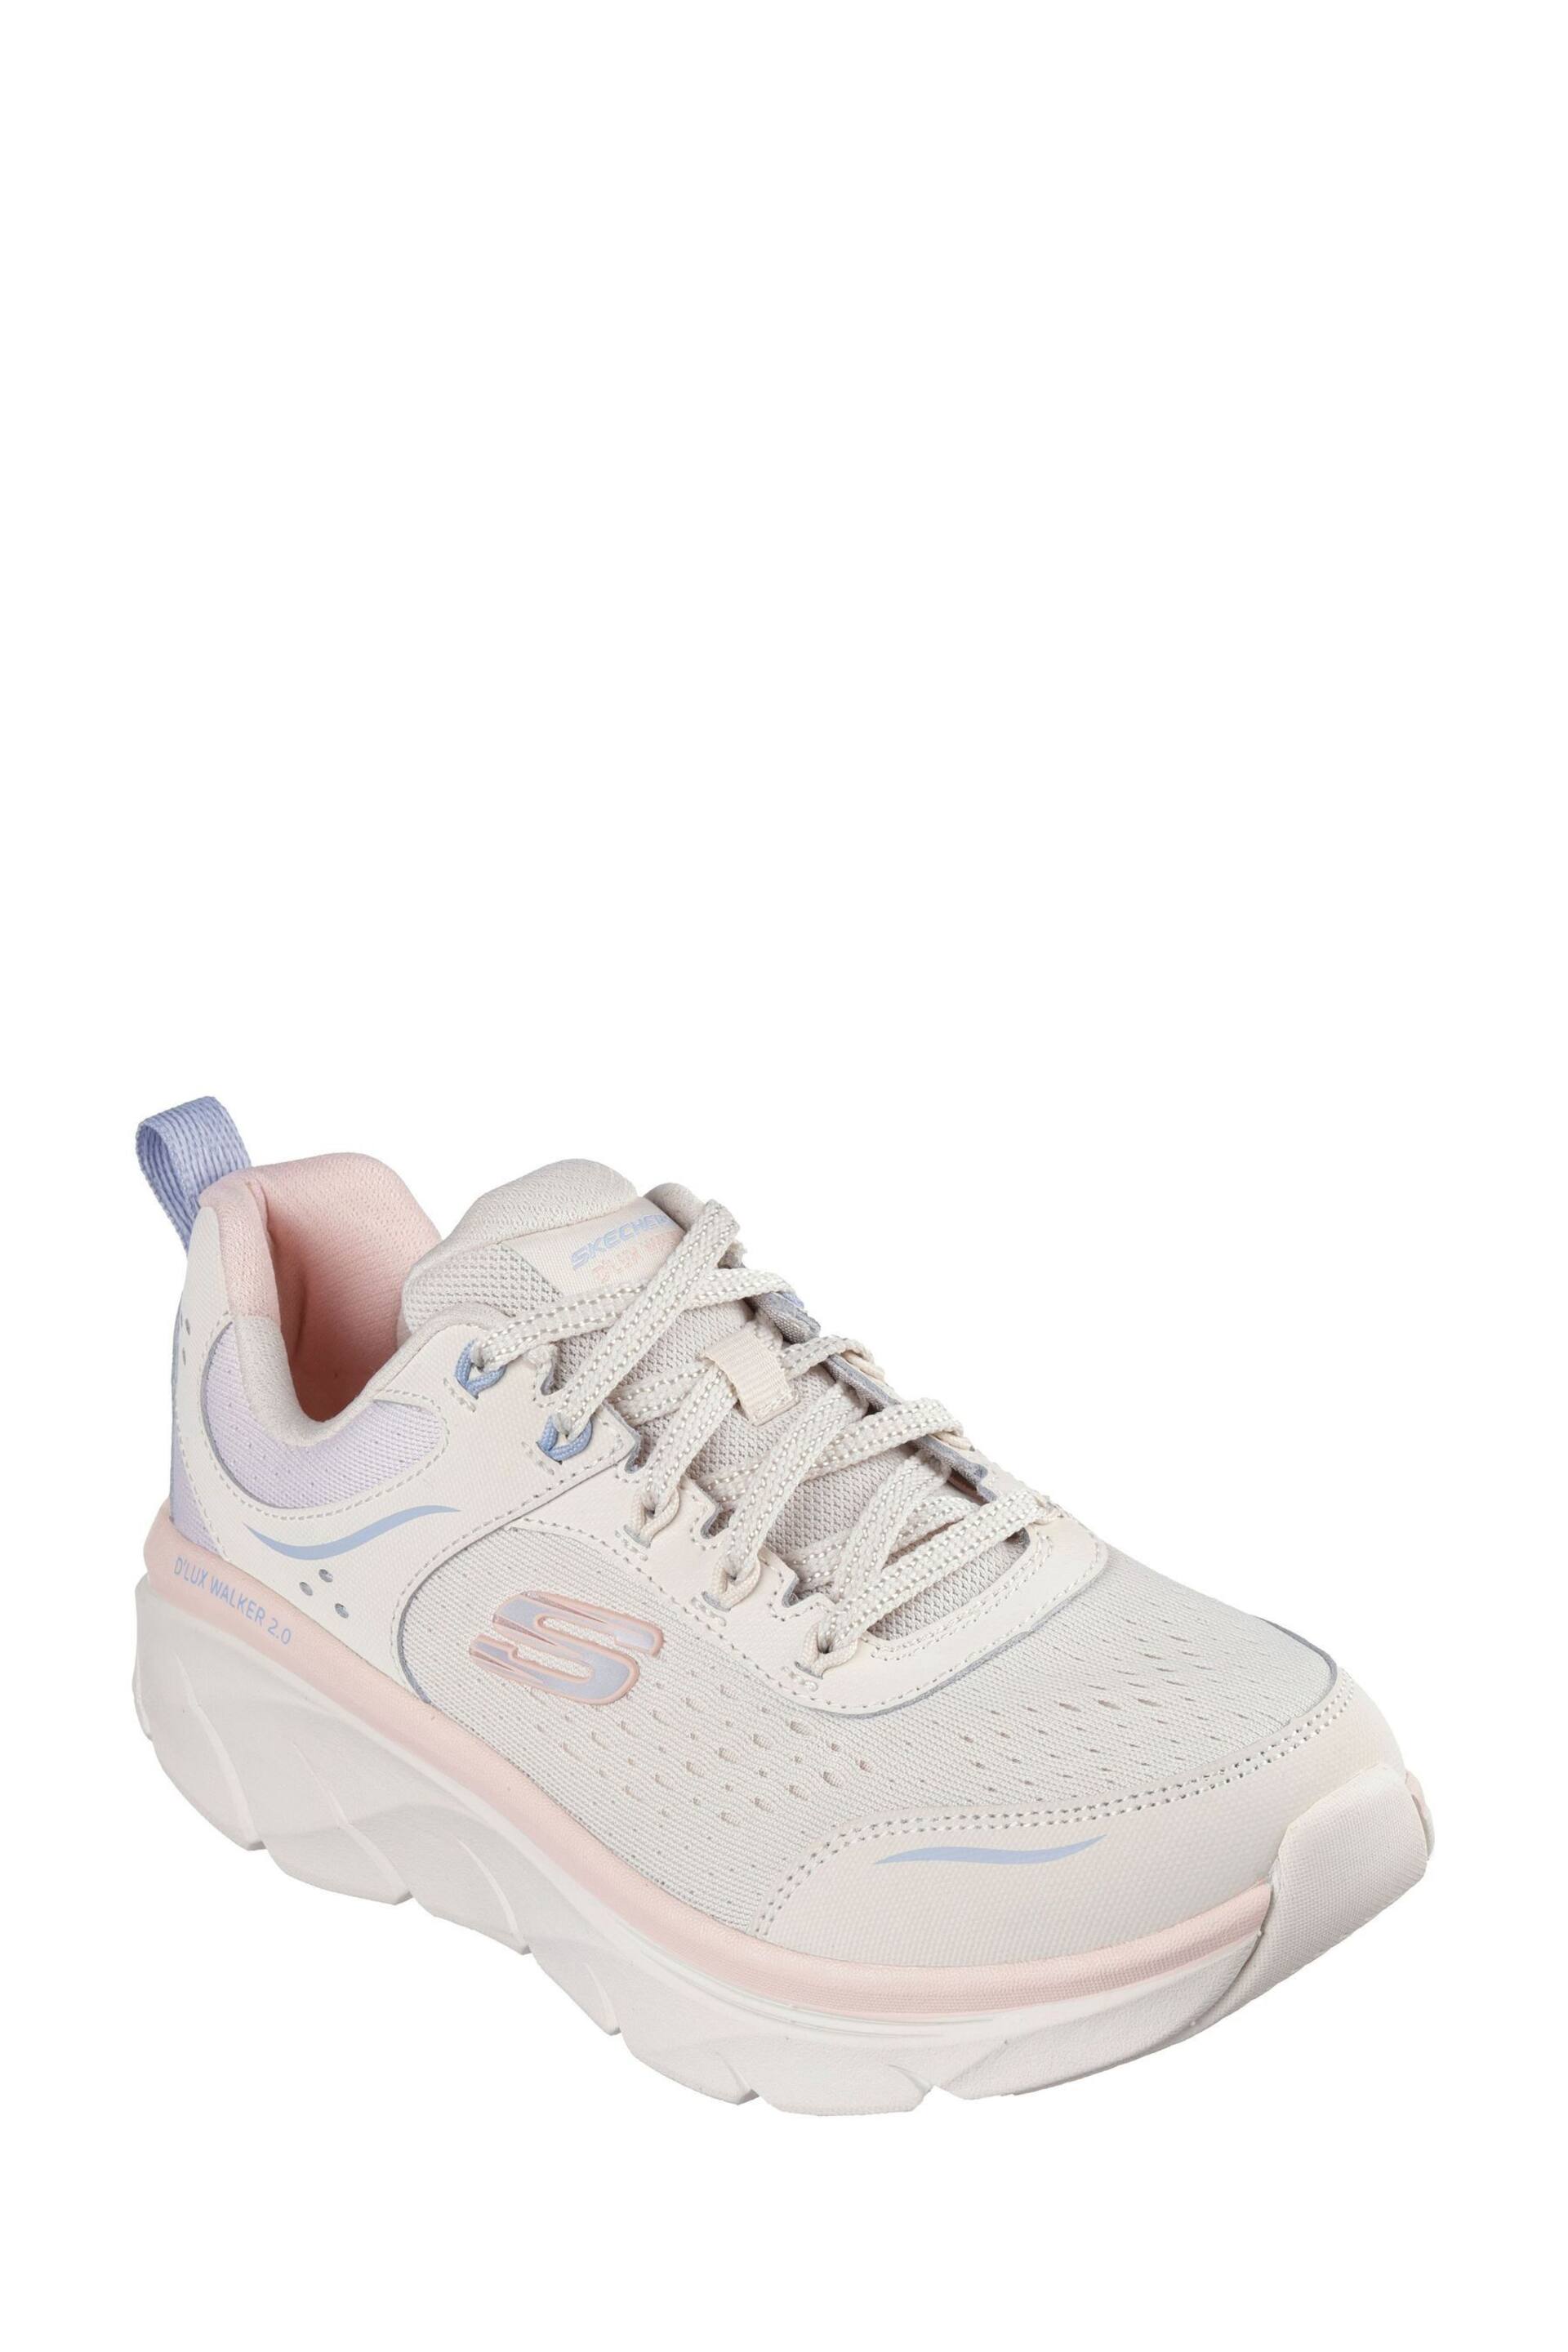 Skechers Natural D’Lux Walker 2.0 Daisy Doll Trainers - Image 3 of 5